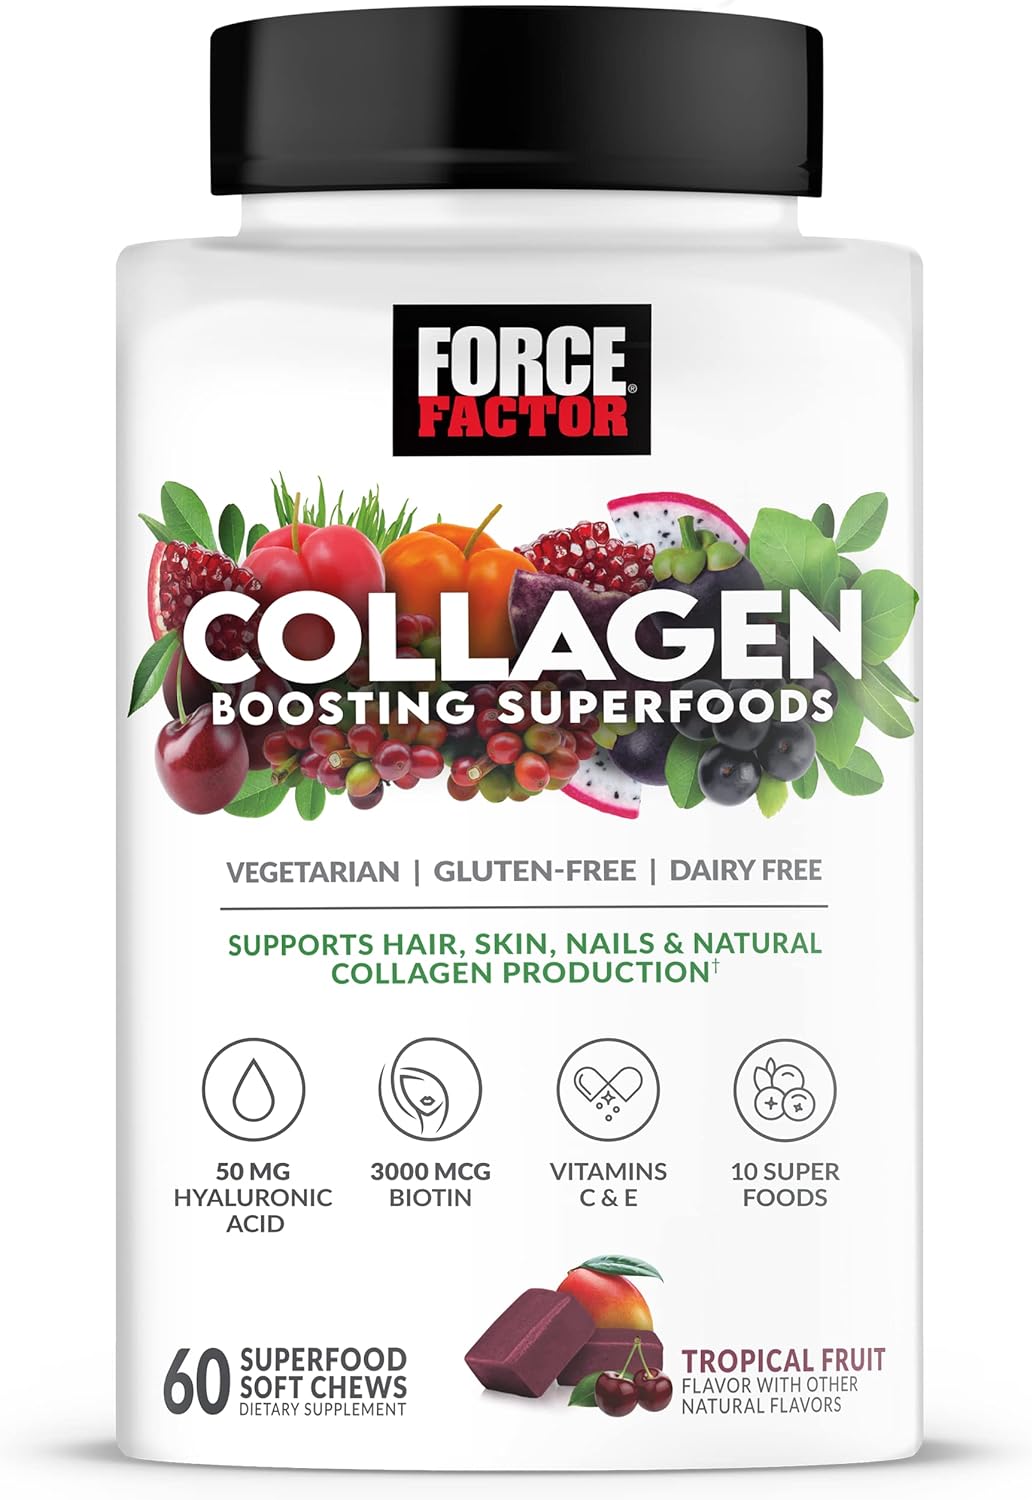 Force Factor Collagen Boosting Superfoods with Biotin, Hyaluronic Acid, Bamboo, and Hair, Skin, and Nails Vitamins, Nail Strengthener and Skin Supplement, Tropical Fruit Flavor, 60 Soft Chews